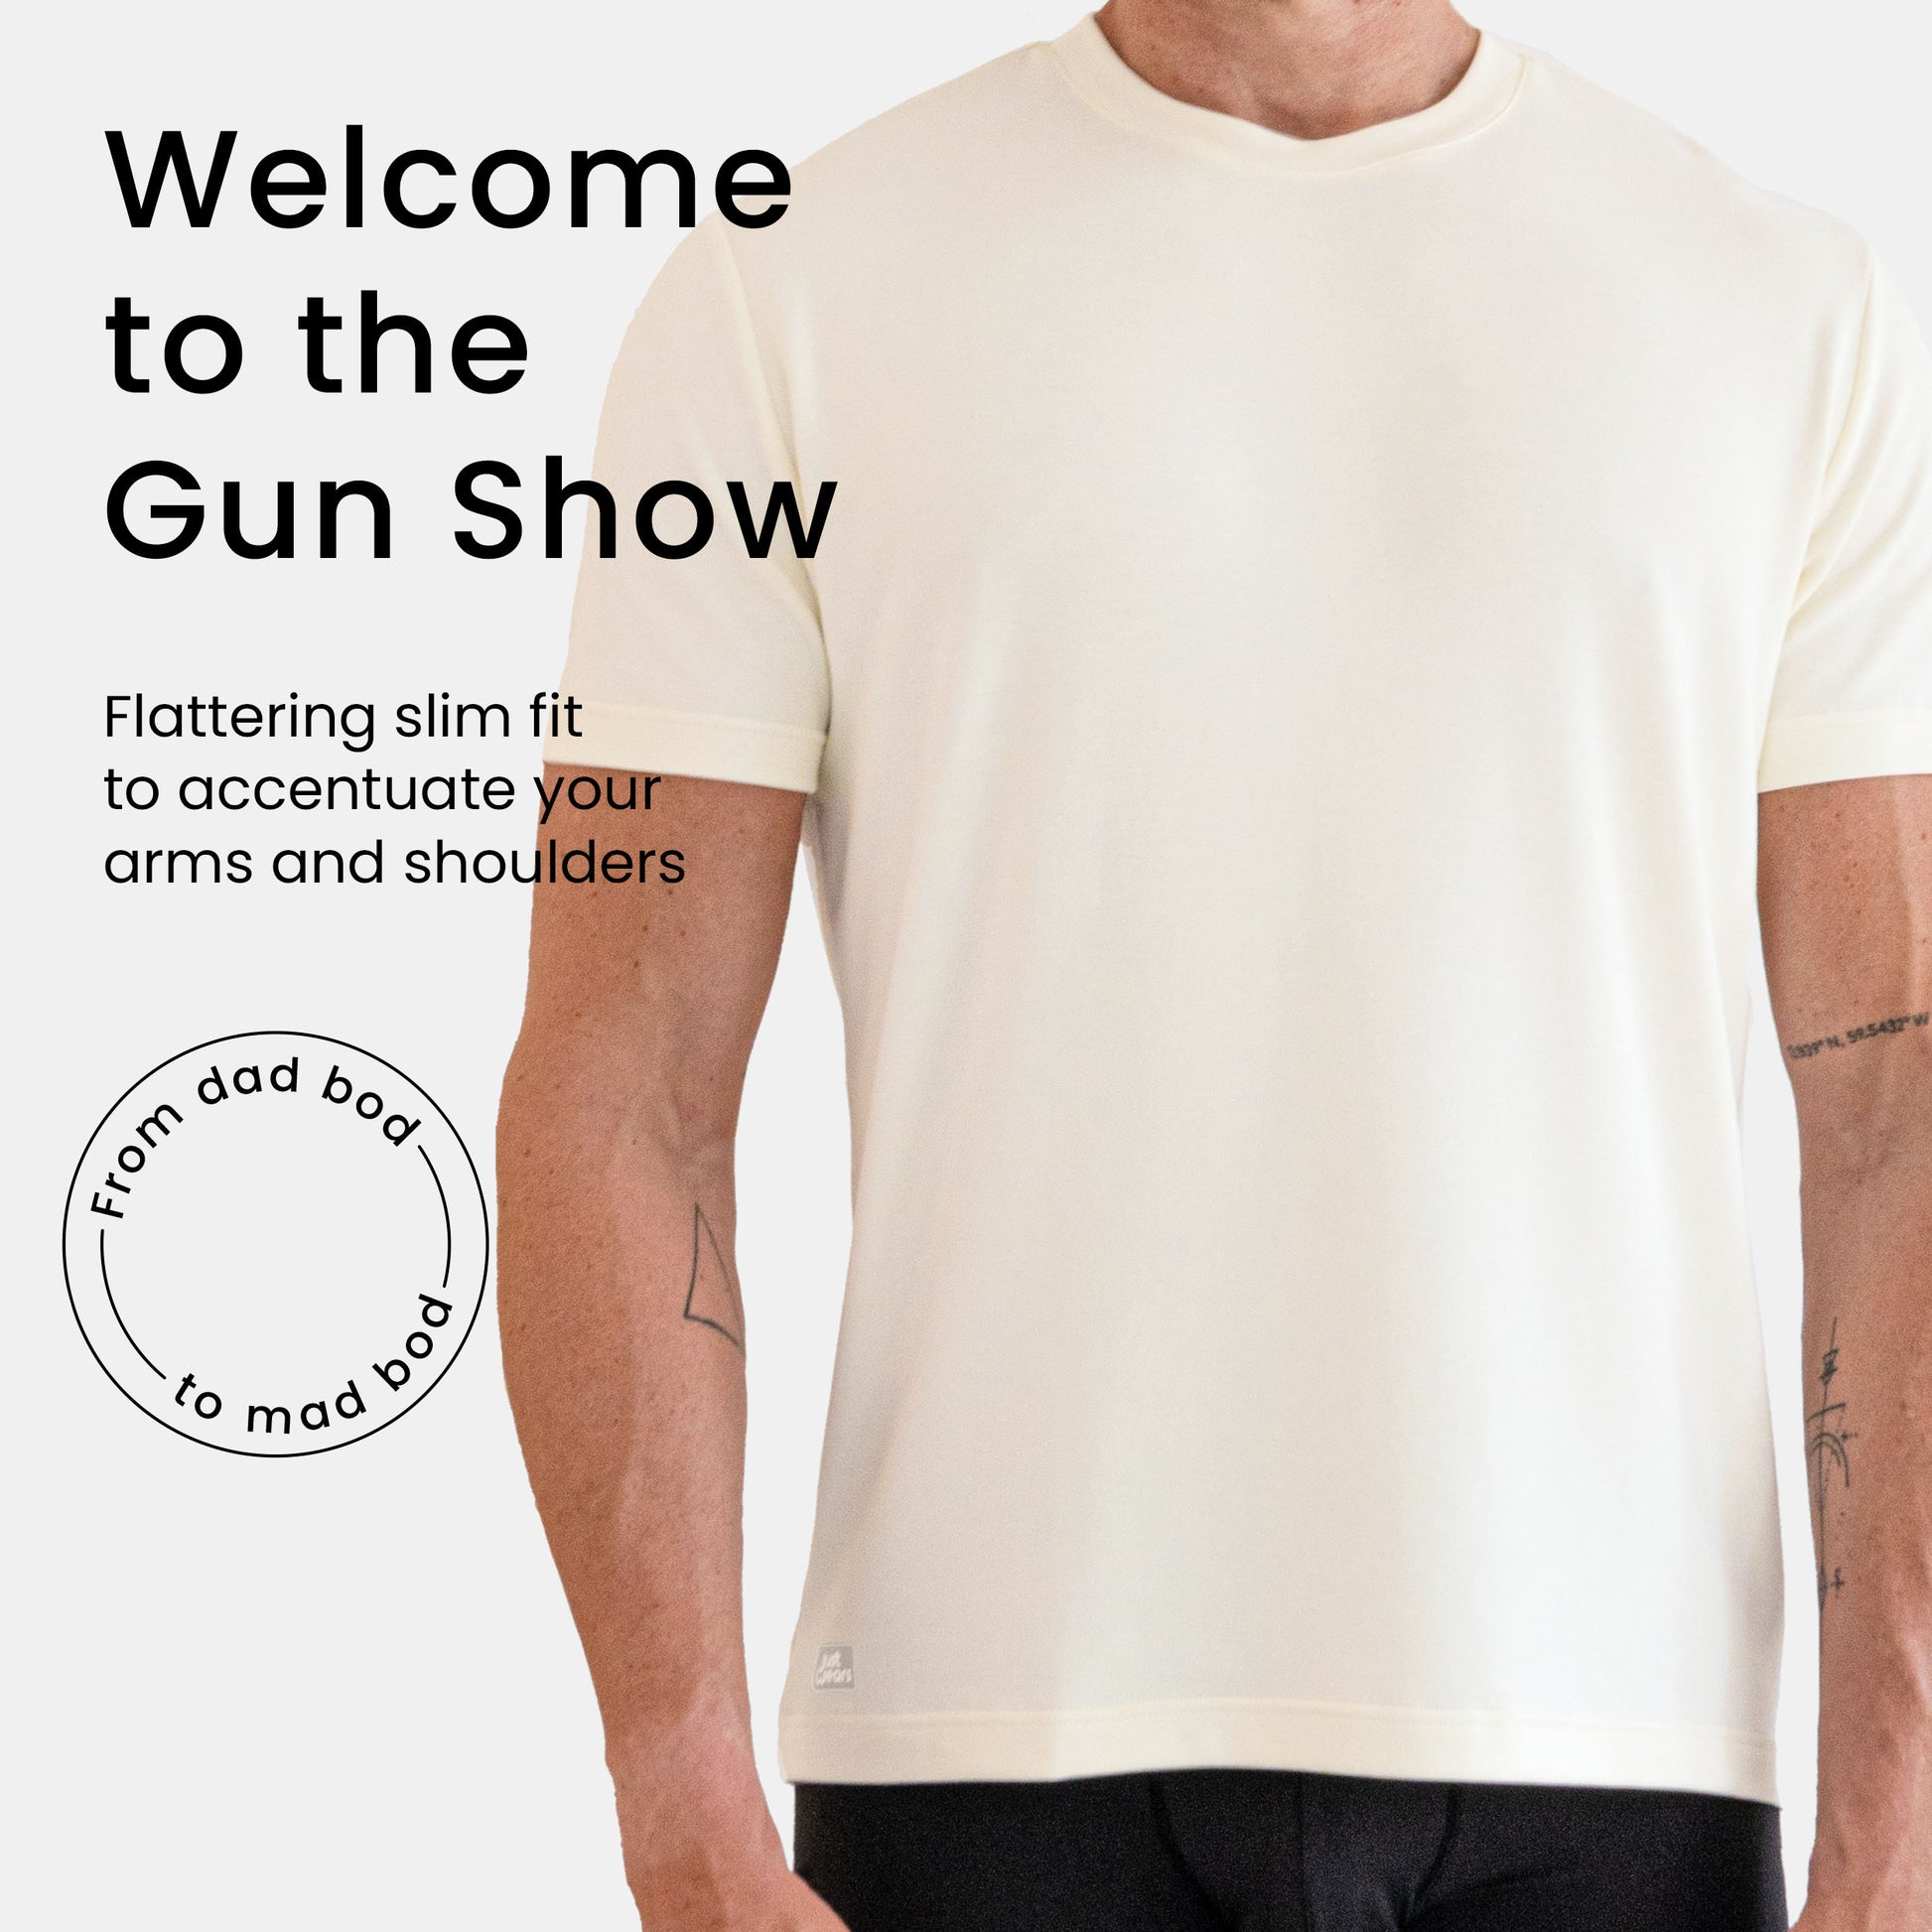 The Ultimate Comfort Tee (color - Off White)